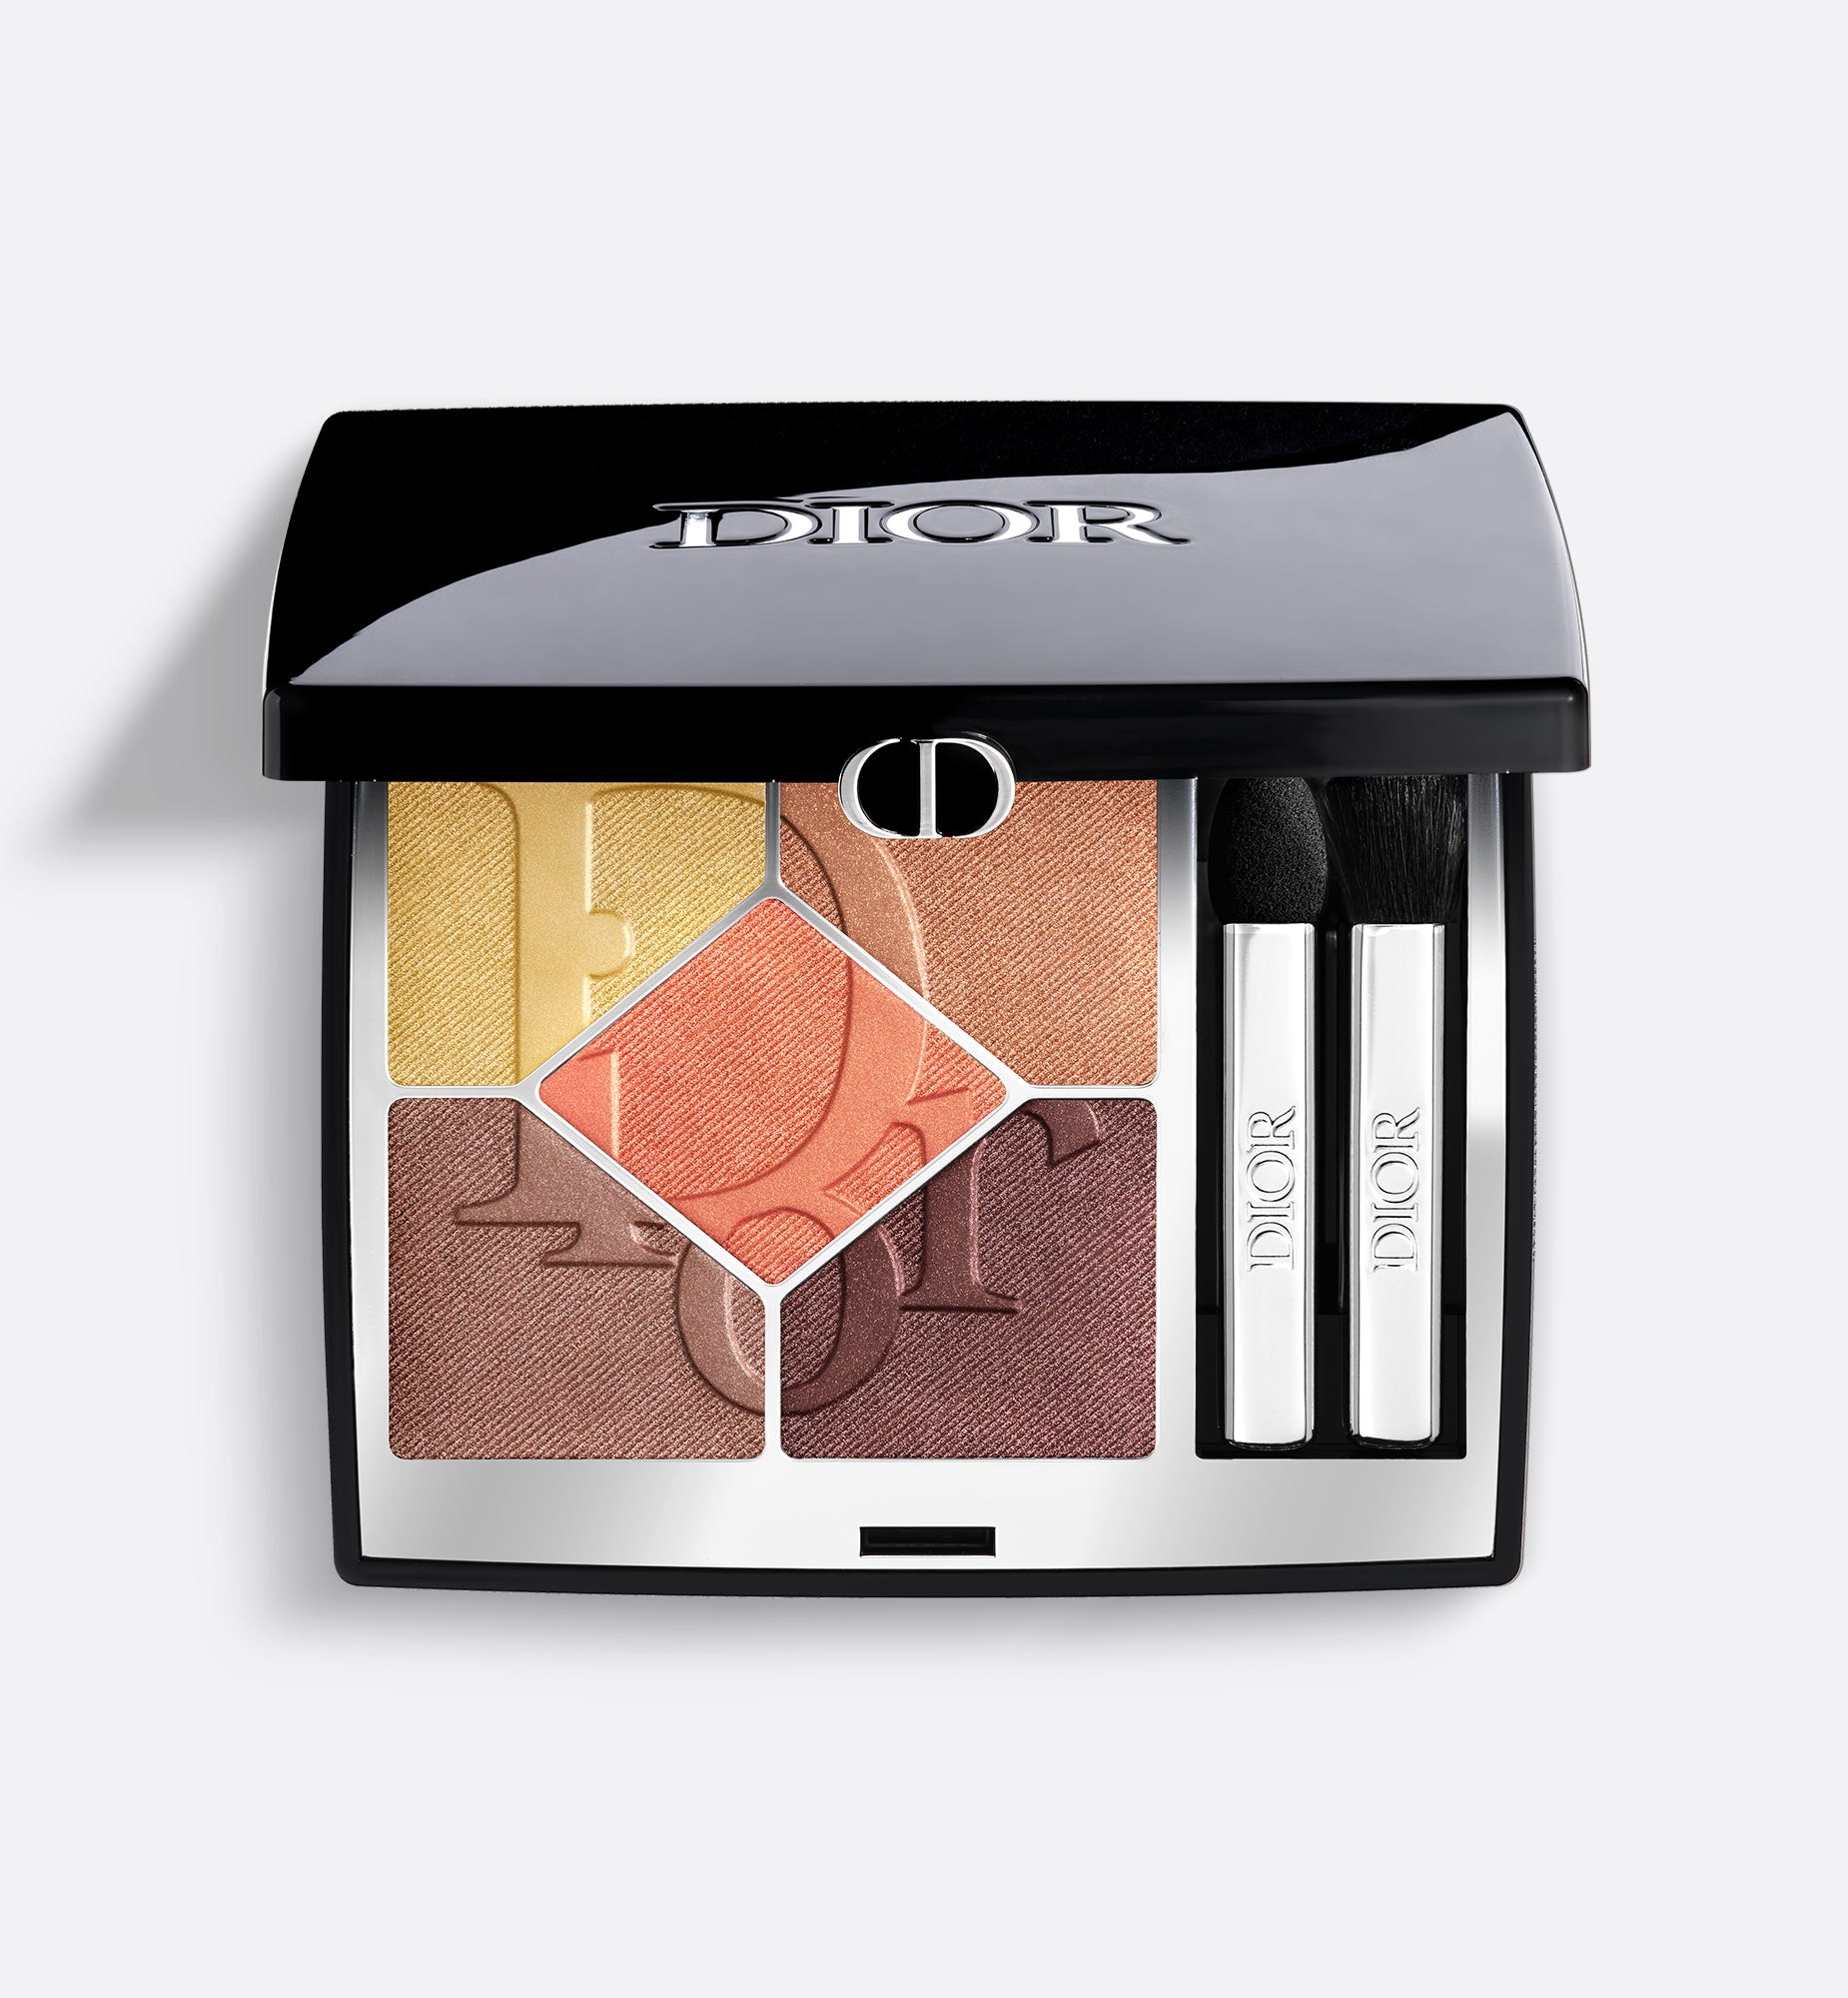 Diorshow 5 Couleurs | High Color Eyeshadow Wardrobe - Limited Edition